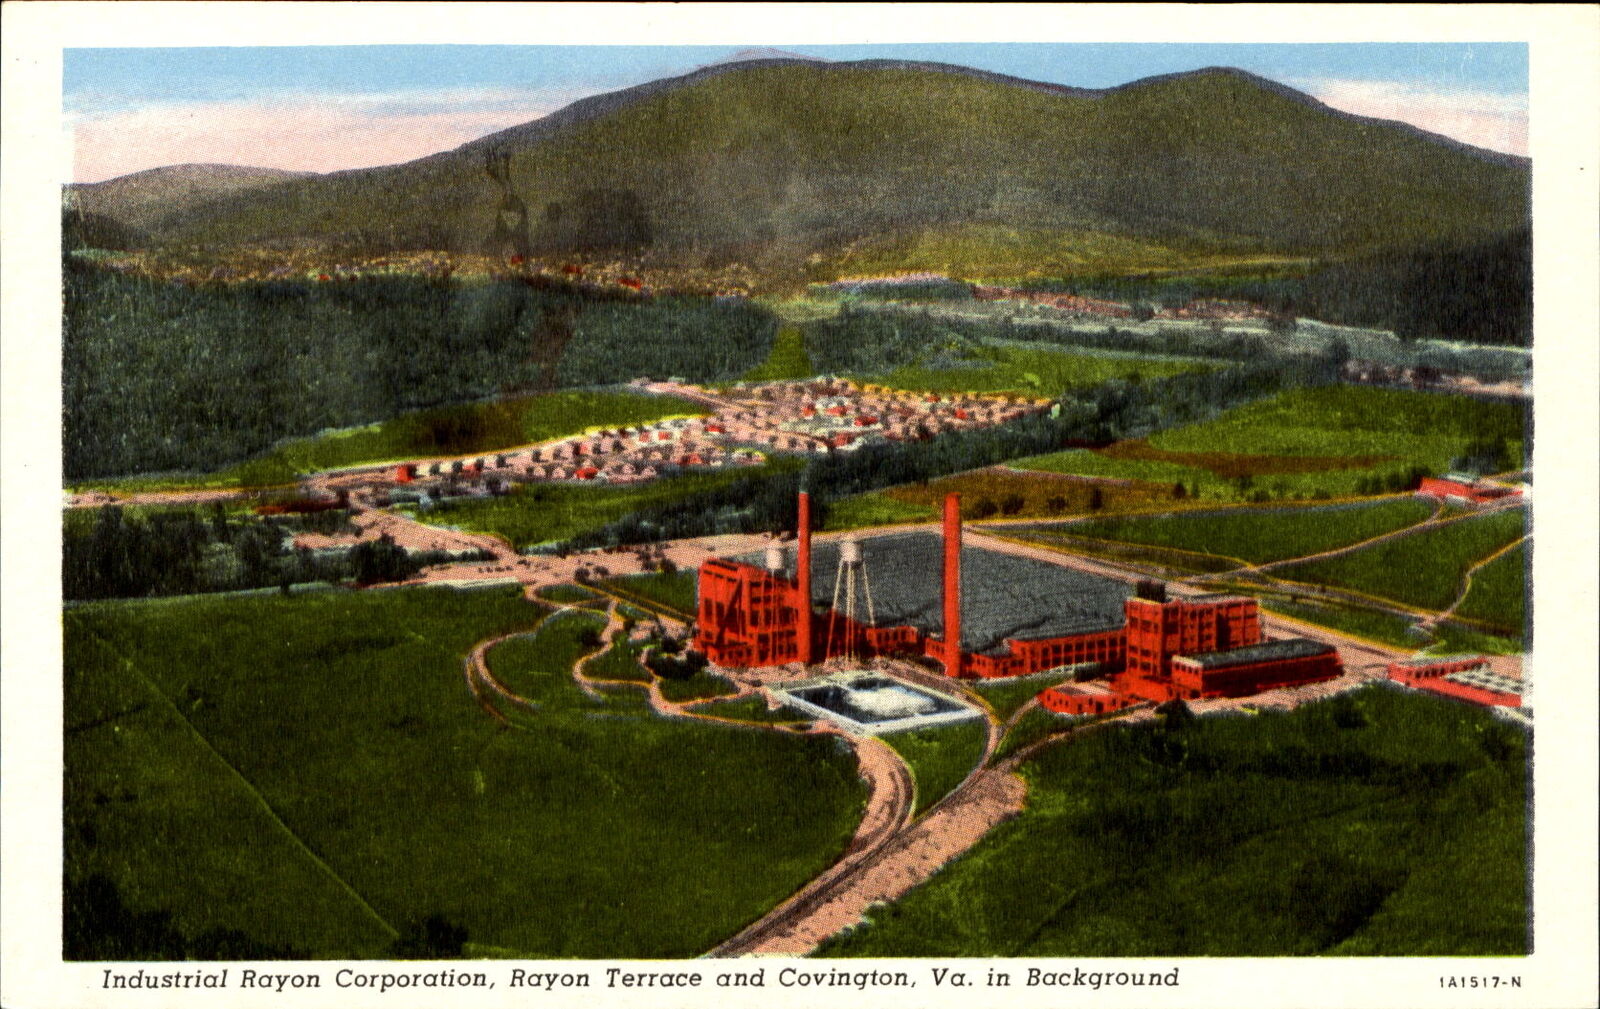 Industrial Rayon Corp manufacturing plant ~ Rayon Terrace & Covington Virginia